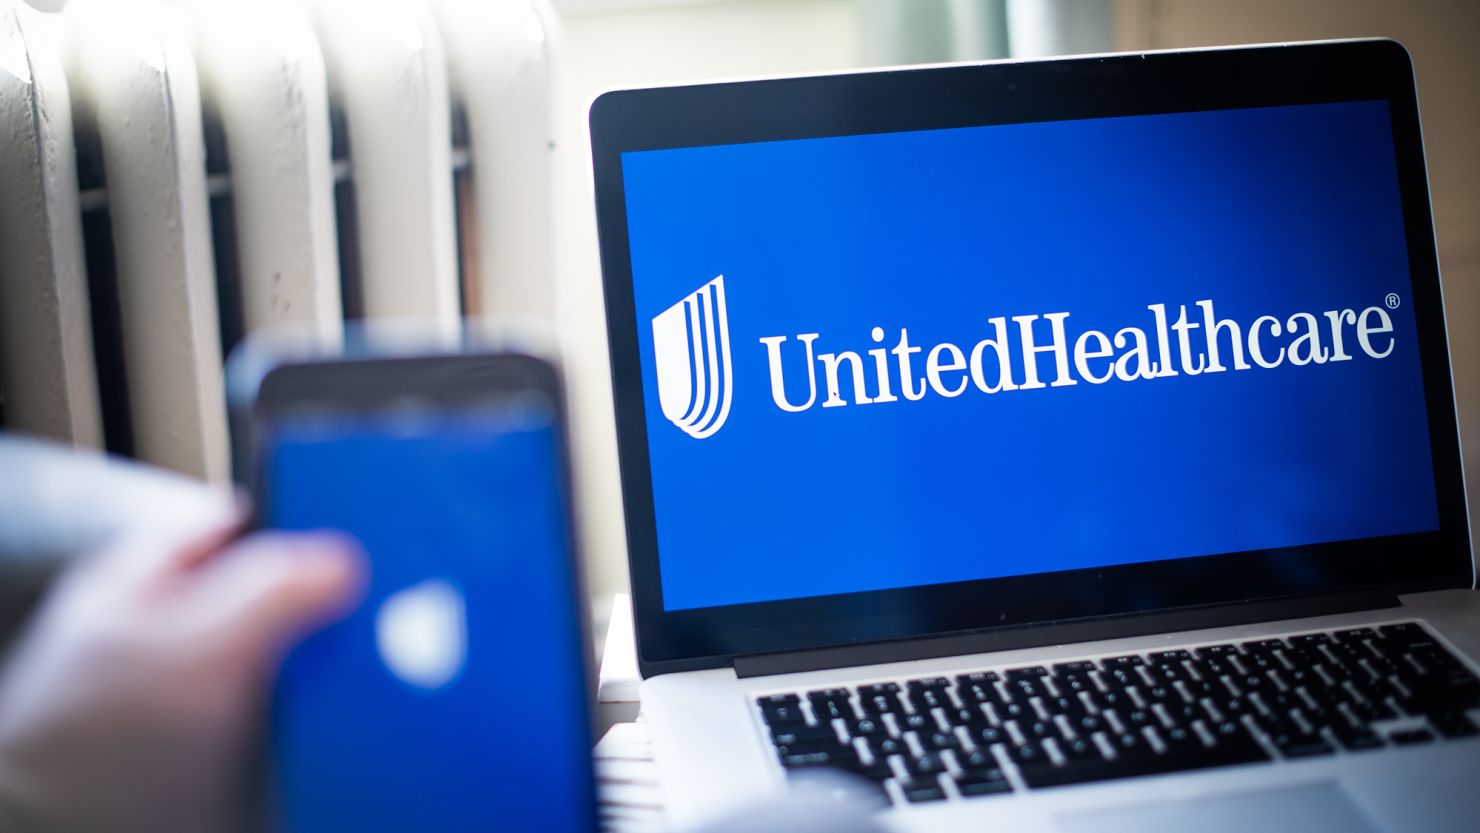 The United HealthCare Group Inc. logo on a laptop computer arranged in Hastings on Hudson, New York, U.S., on Saturday, Jan. 23, 2021.